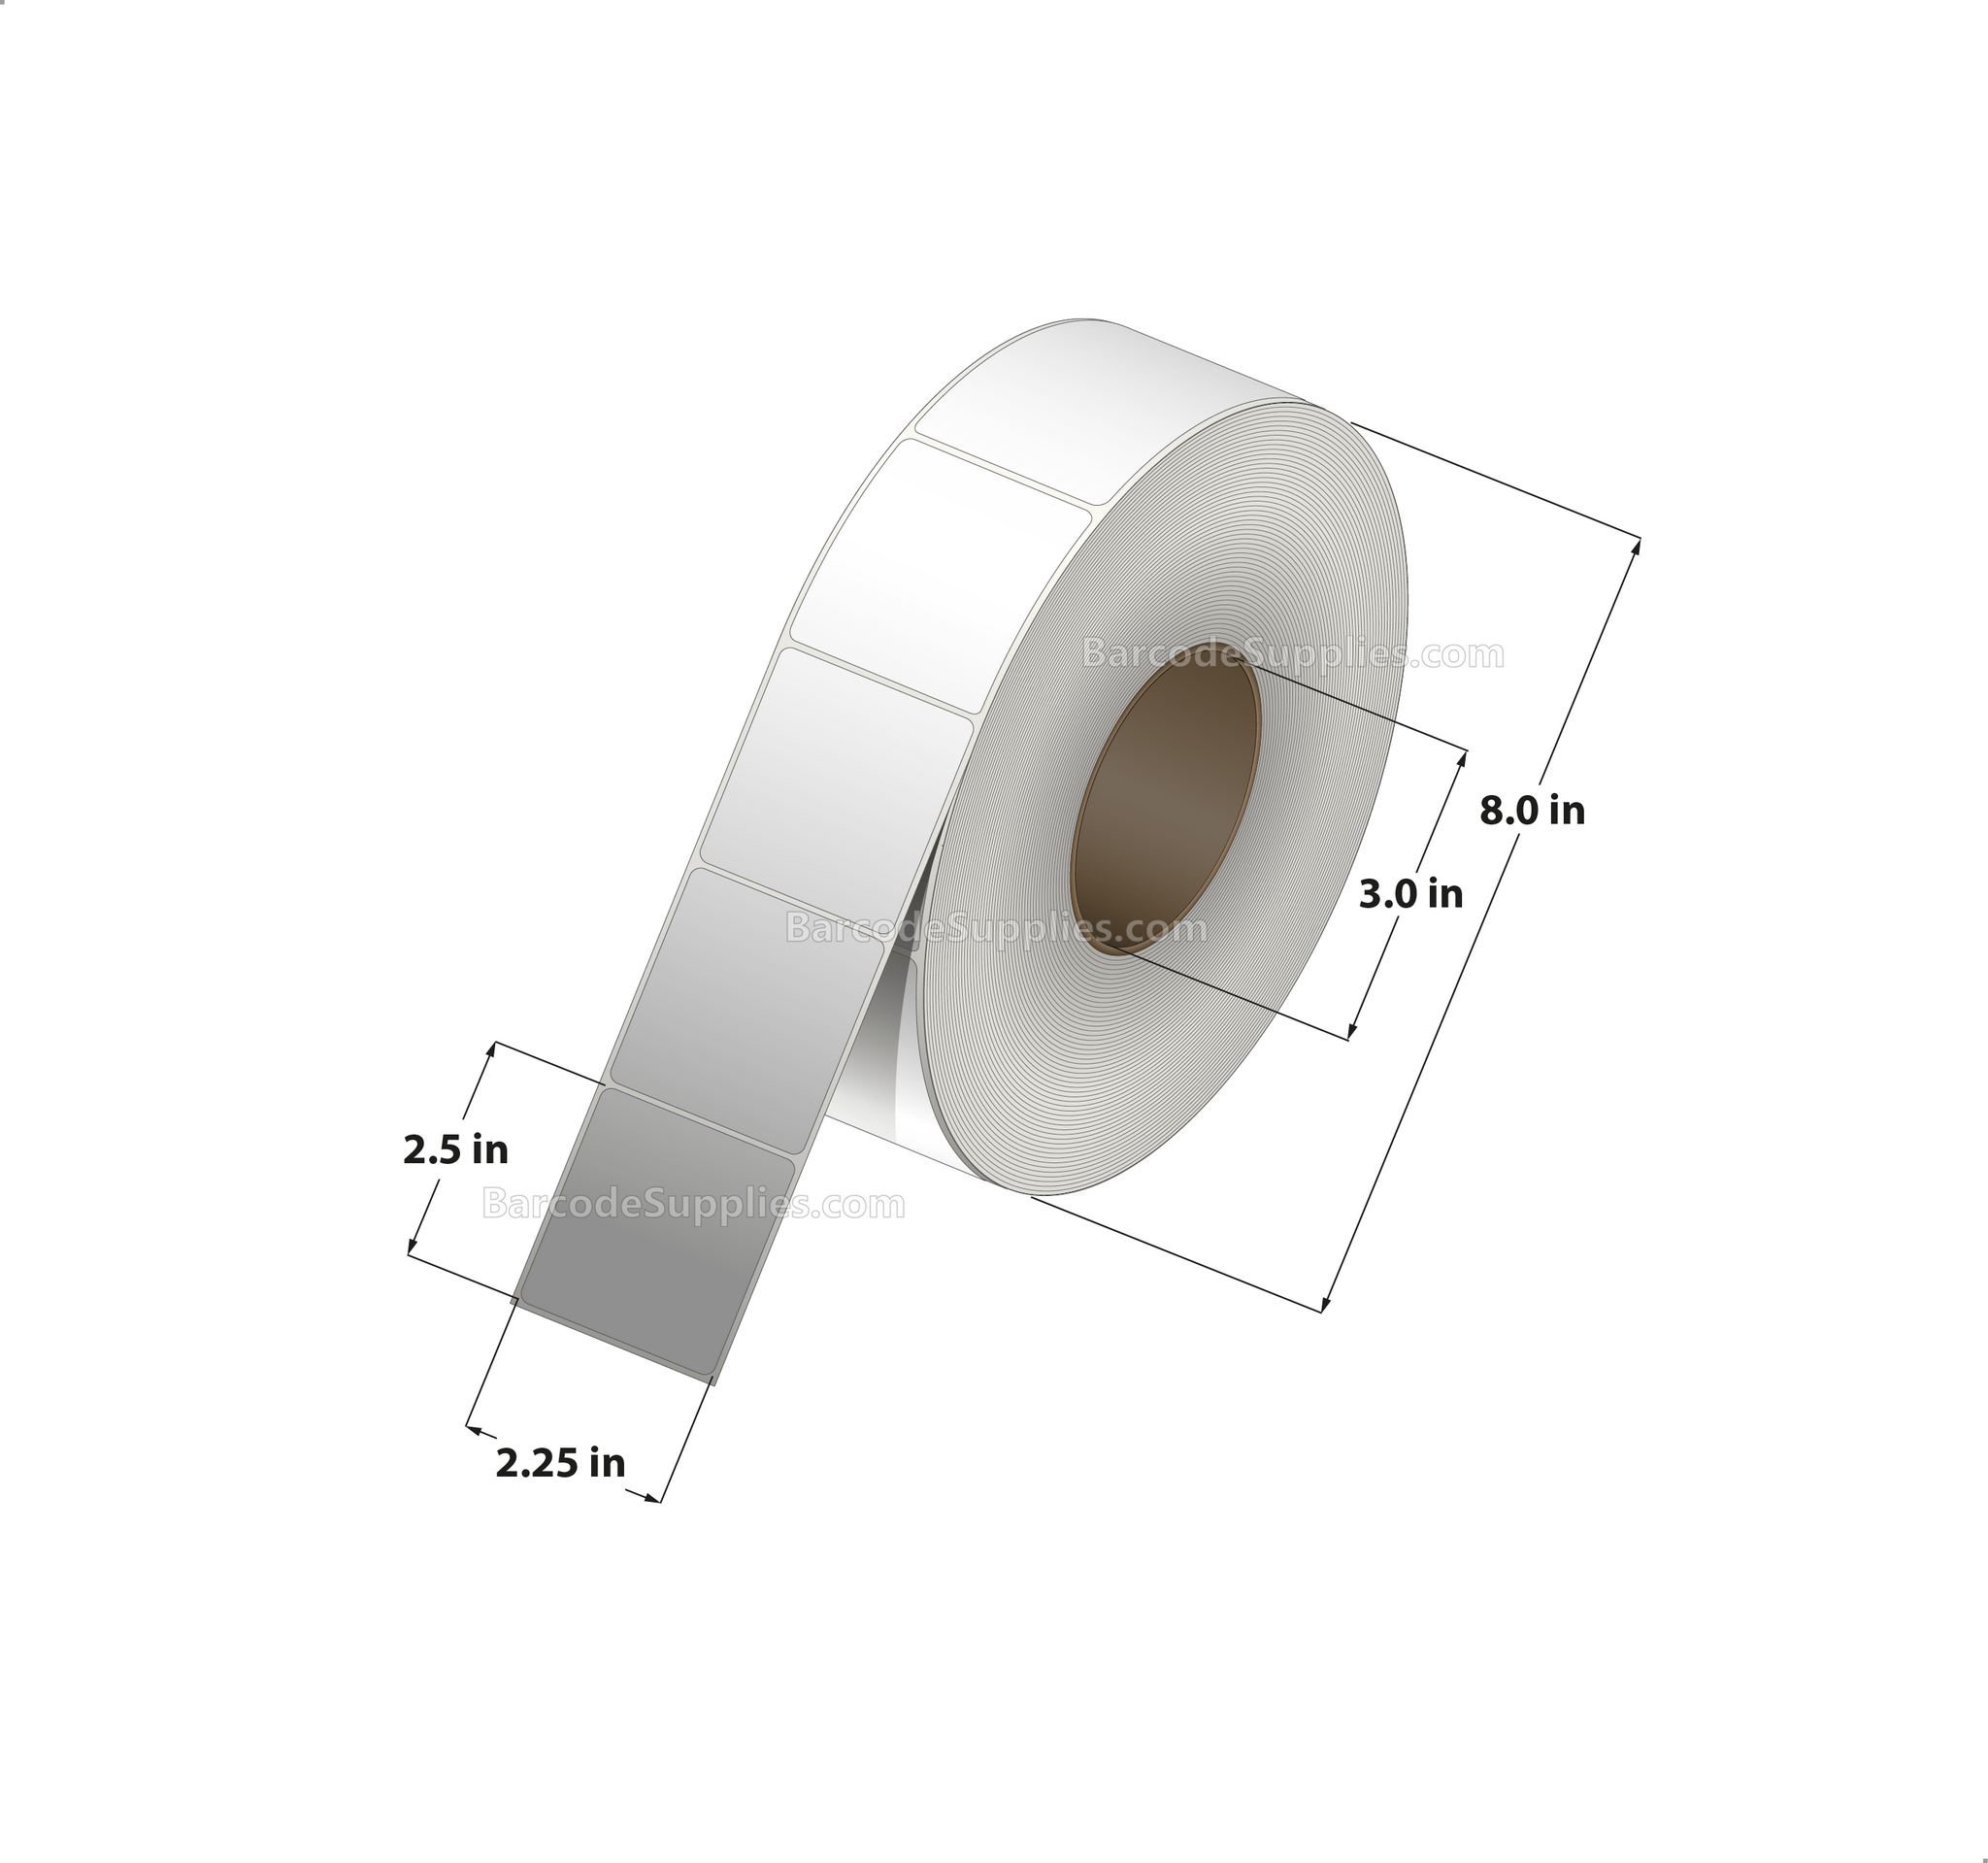 2 x 2.5 Thermal Transfer White Labels With Rubber Adhesive - No Perforation - 5000 Labels Per Roll - Carton Of 4 Rolls - 20000 Labels Total - MPN: CTT200250-3